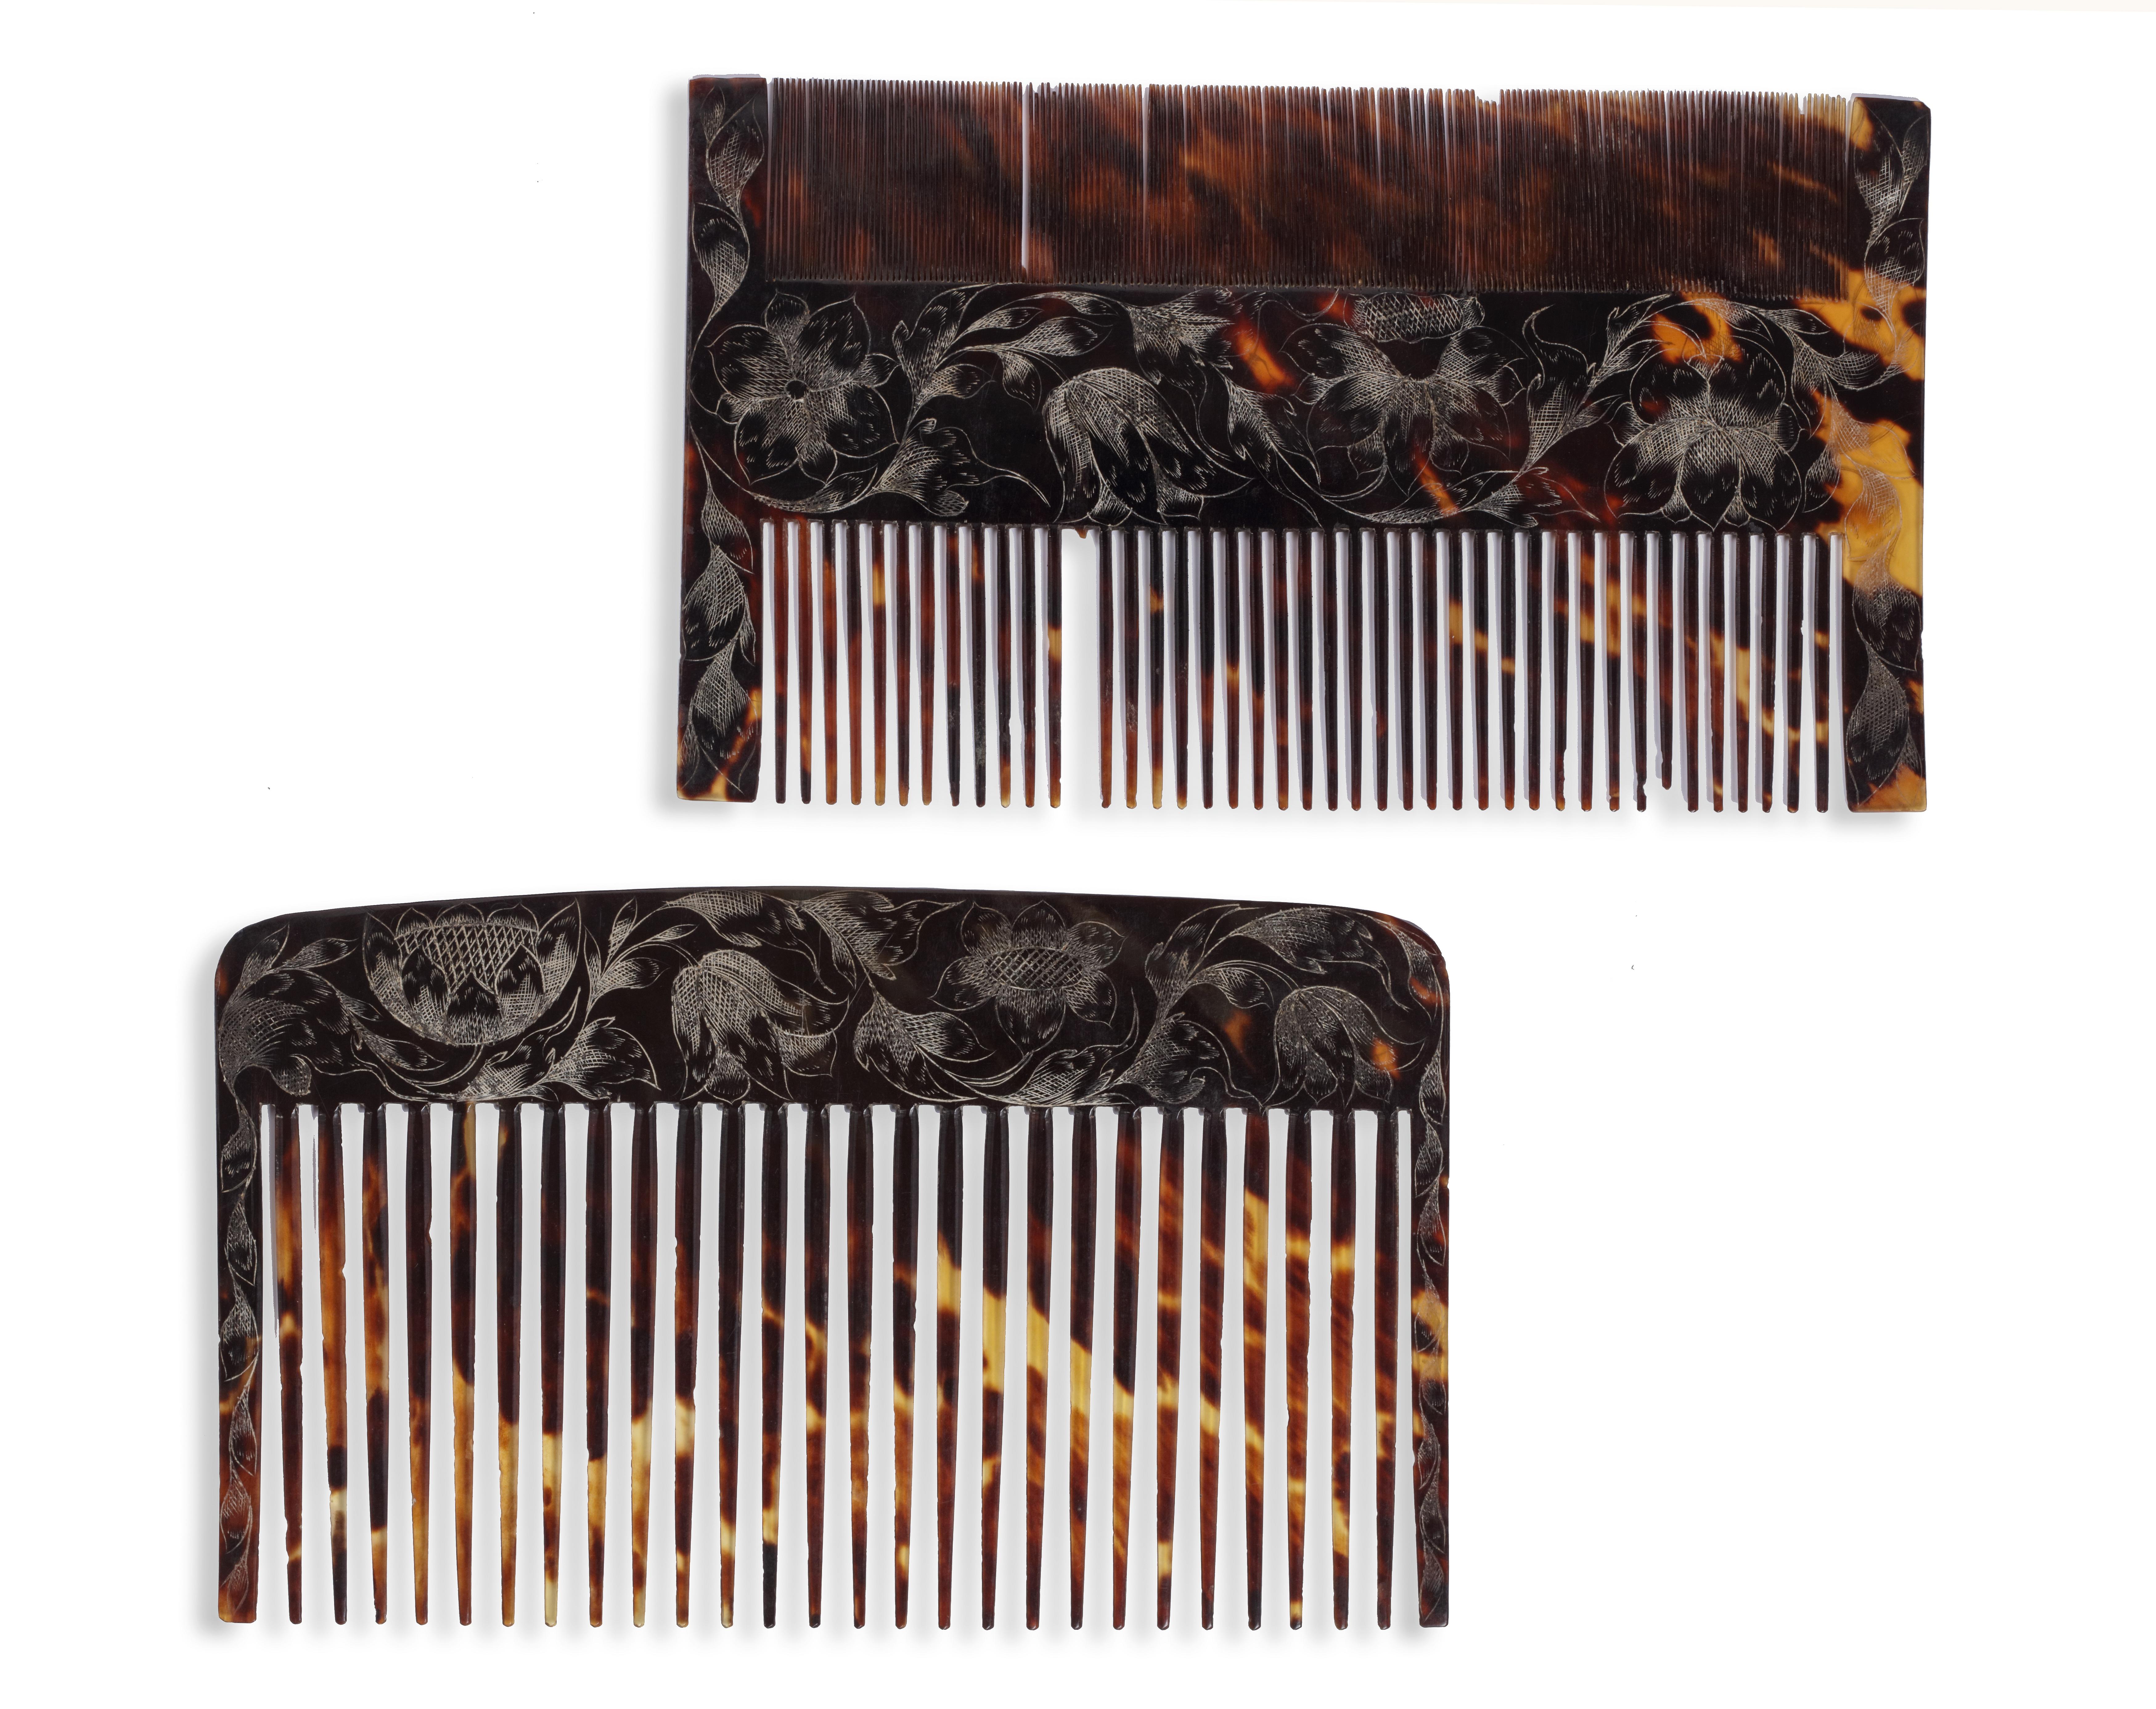 18th Century and Earlier Jamaican Colonial Engraved Tortoiseshell Comb-Case with Two Combs, Dated 1670